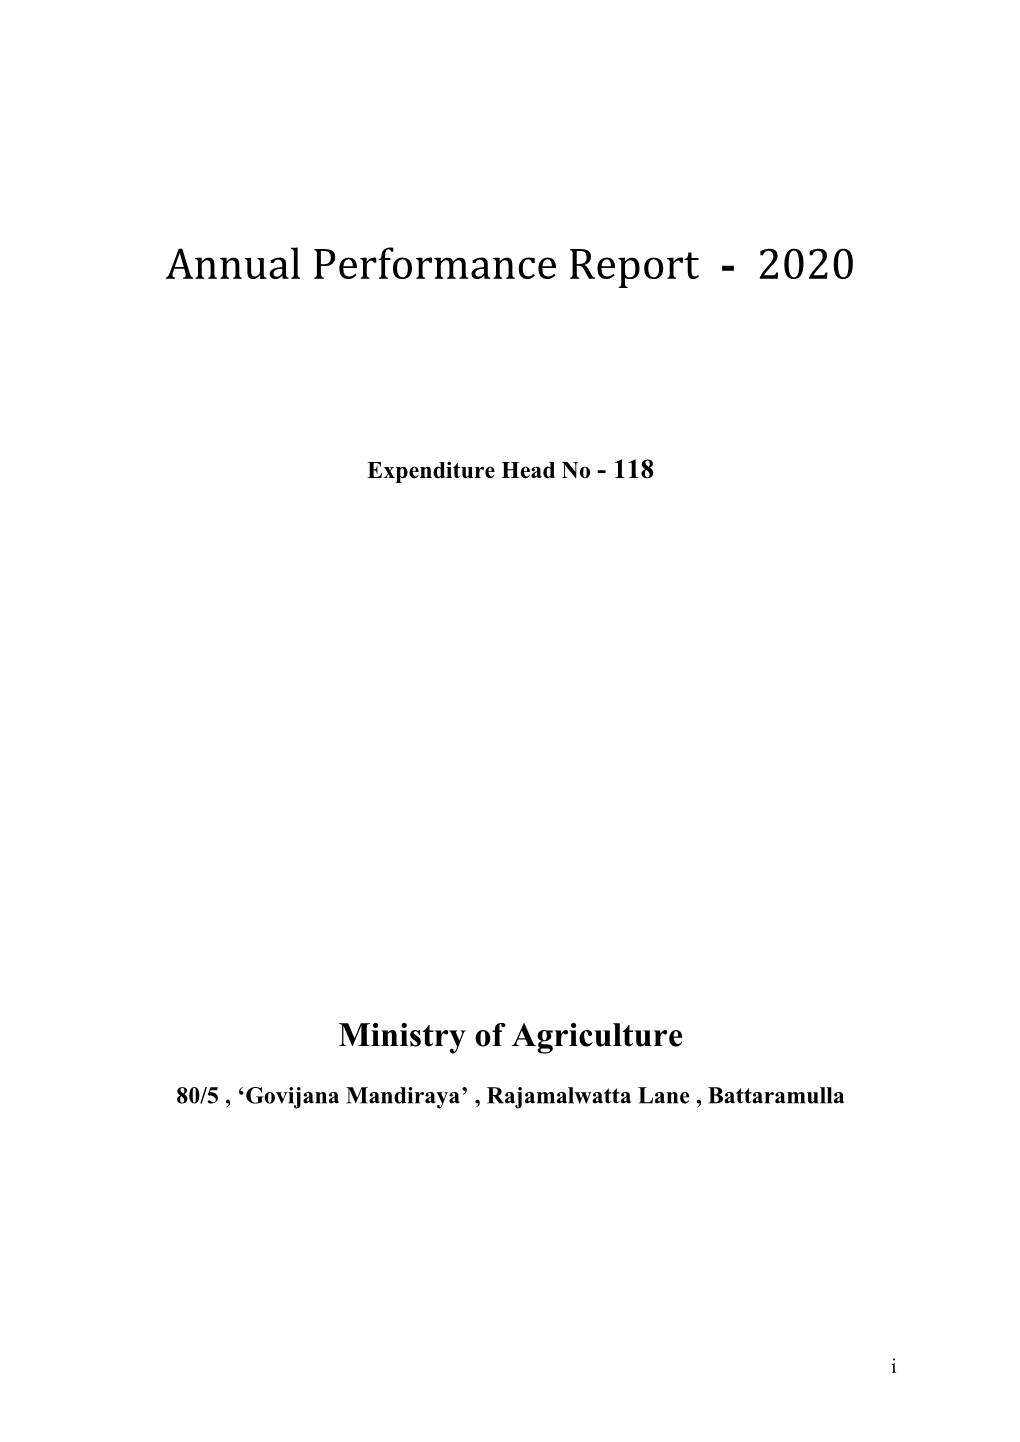 Annual Performance Report - 2020